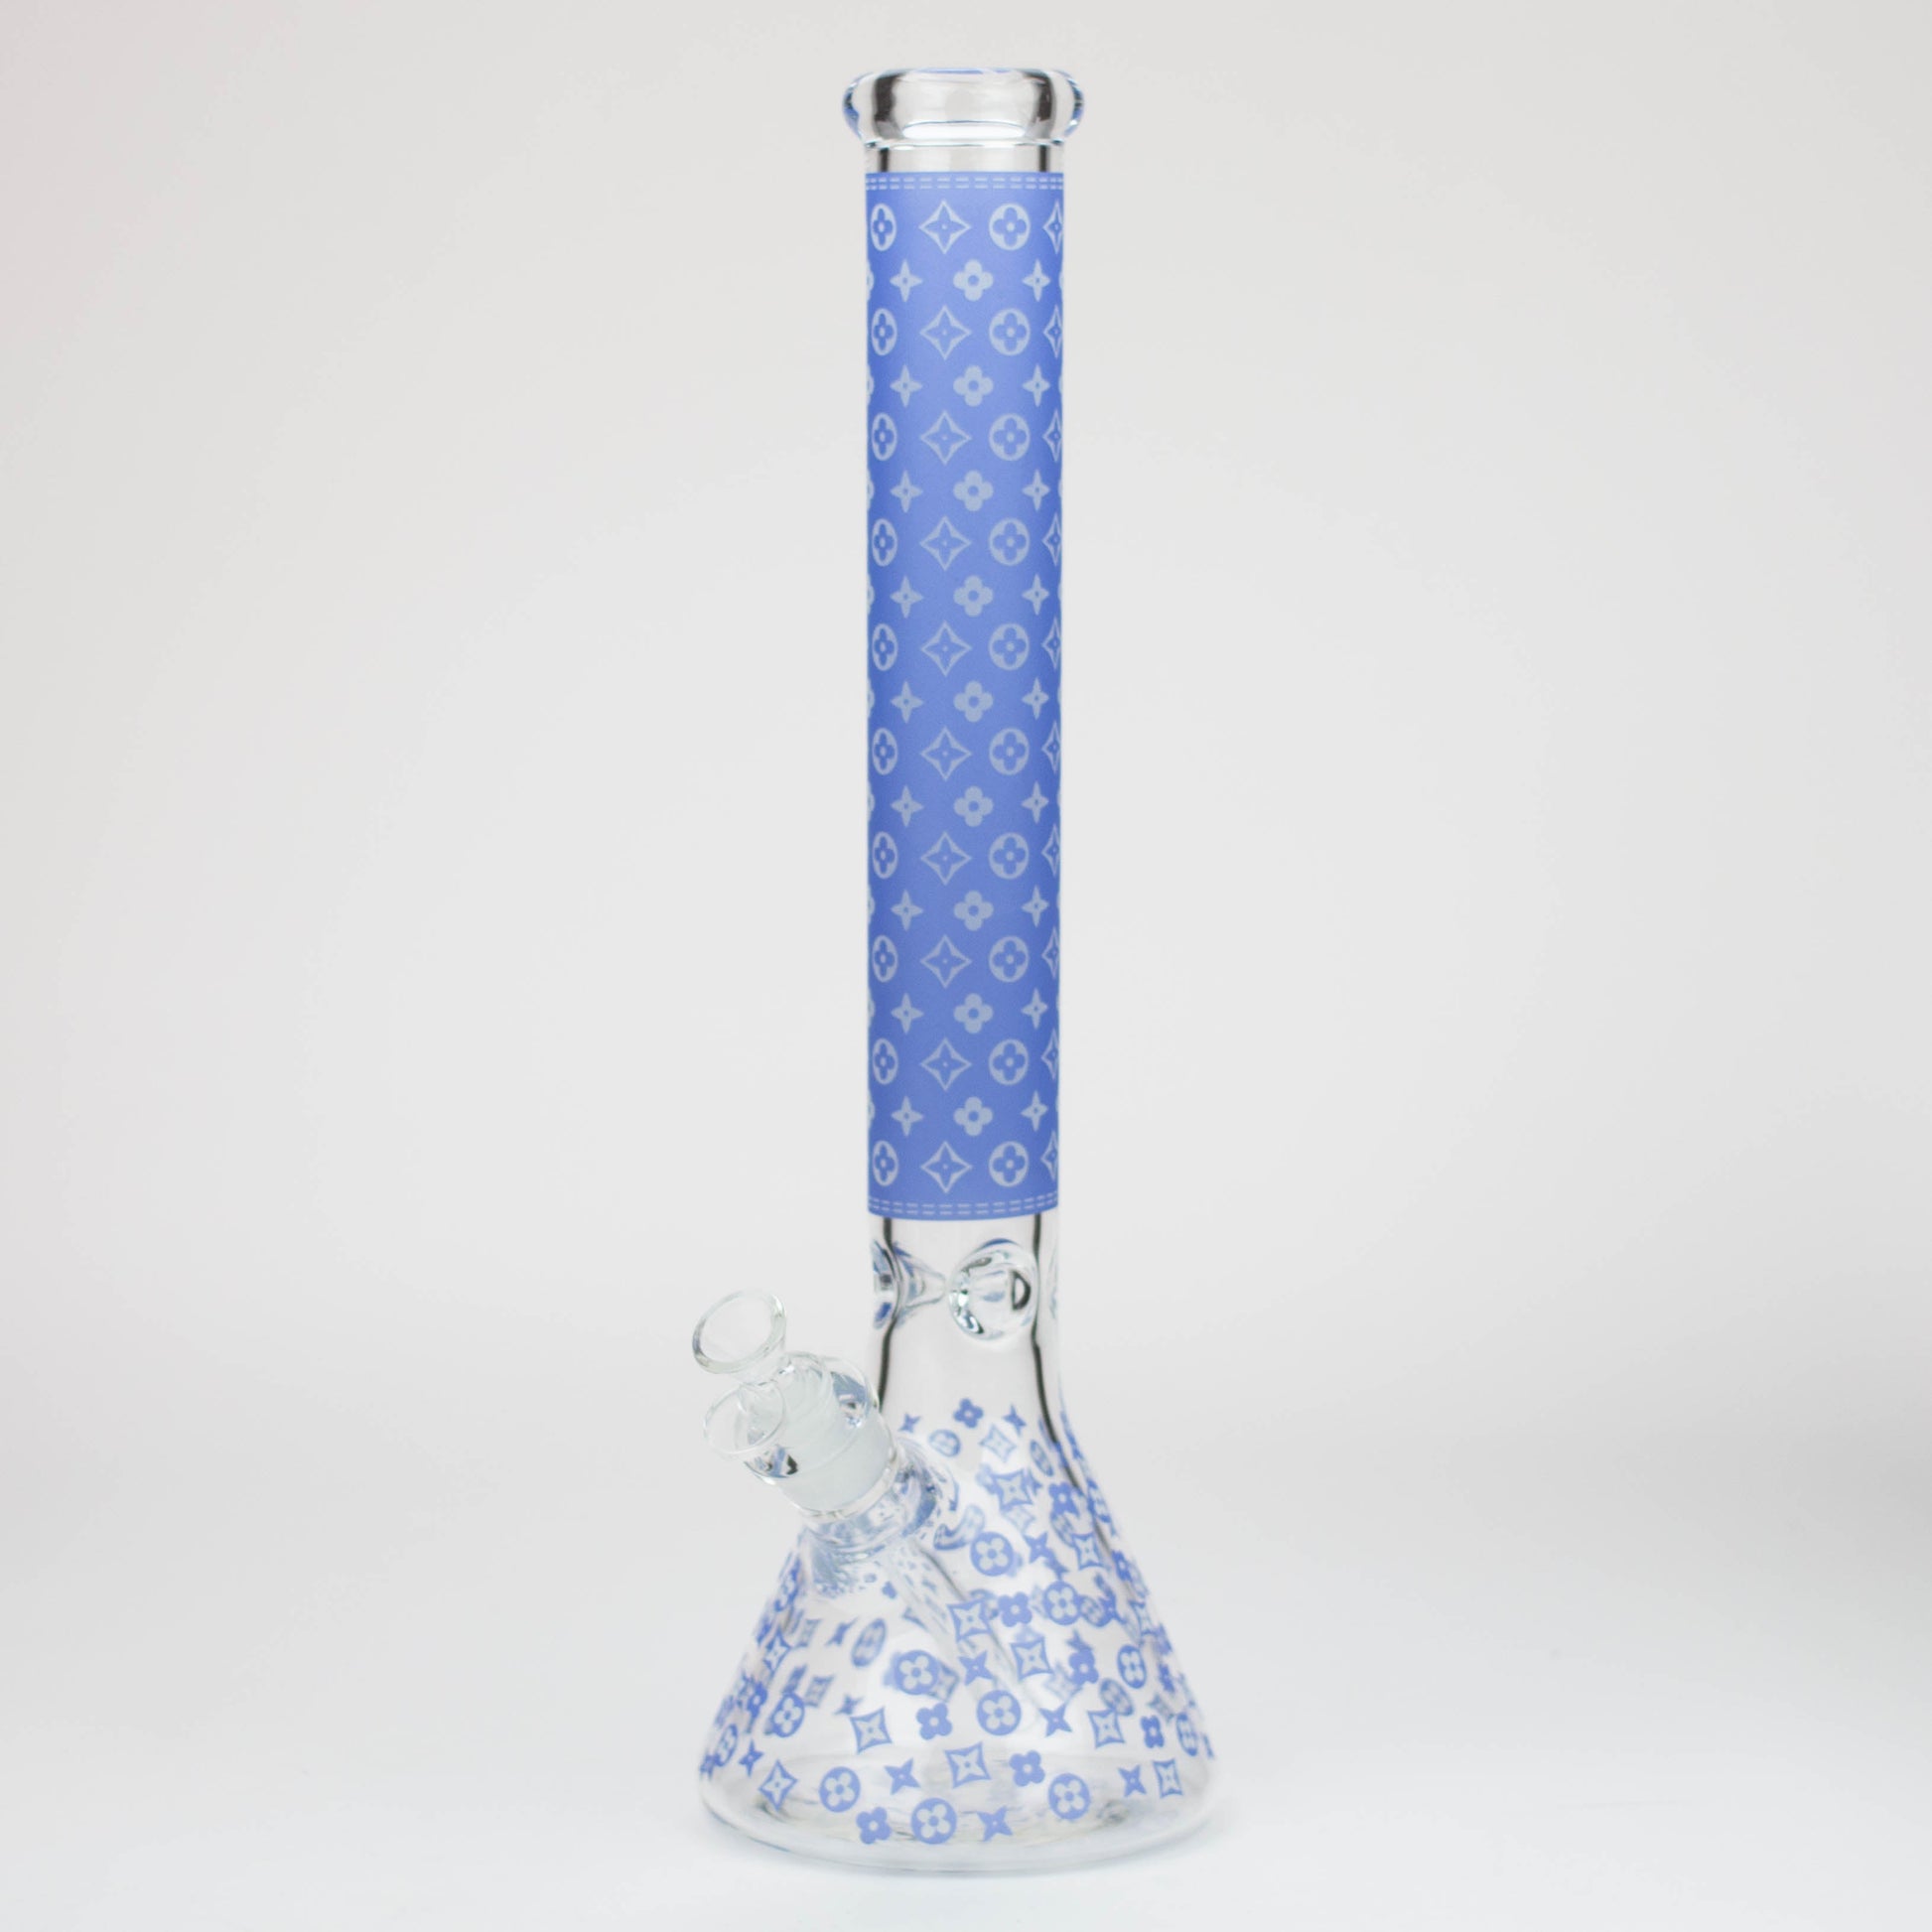 18" LV Glow in the dark 7 mm glass water bong_8